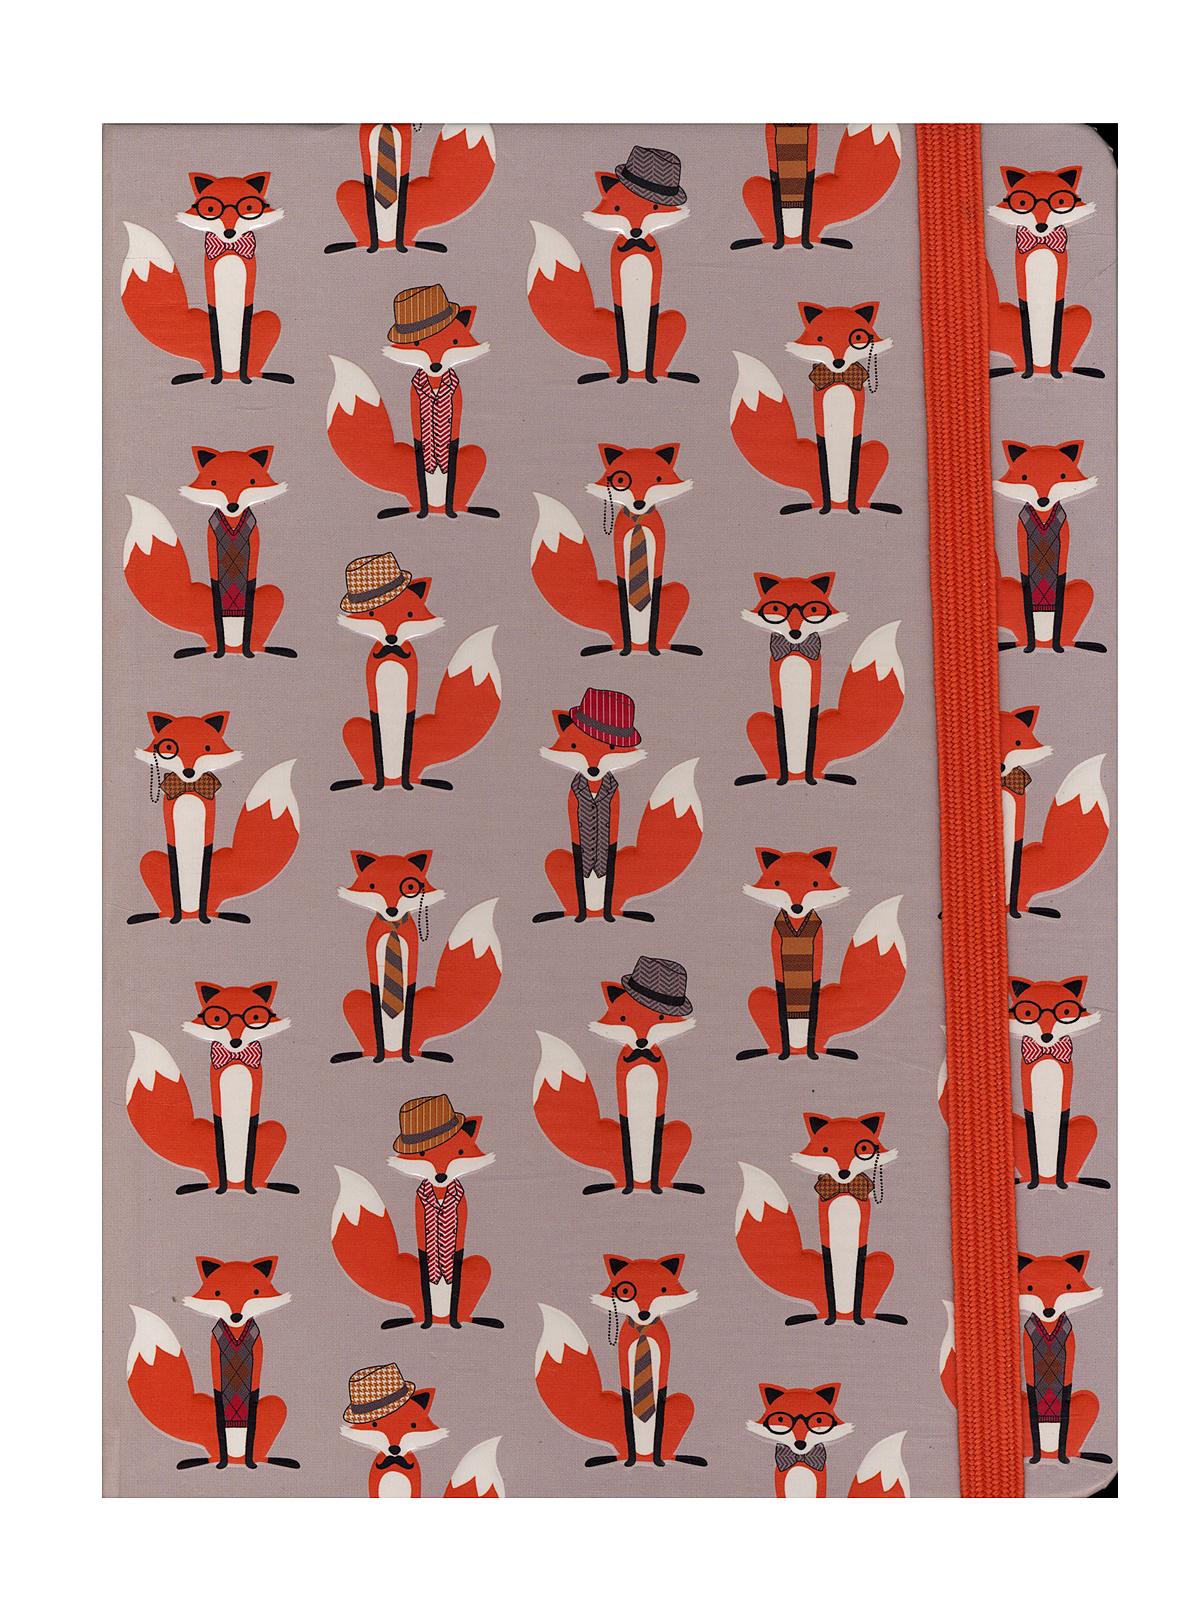 Mid-size Journals Dapper Foxes 6 1 4 In. X 8 1 4 In. 160 Pages, Lined